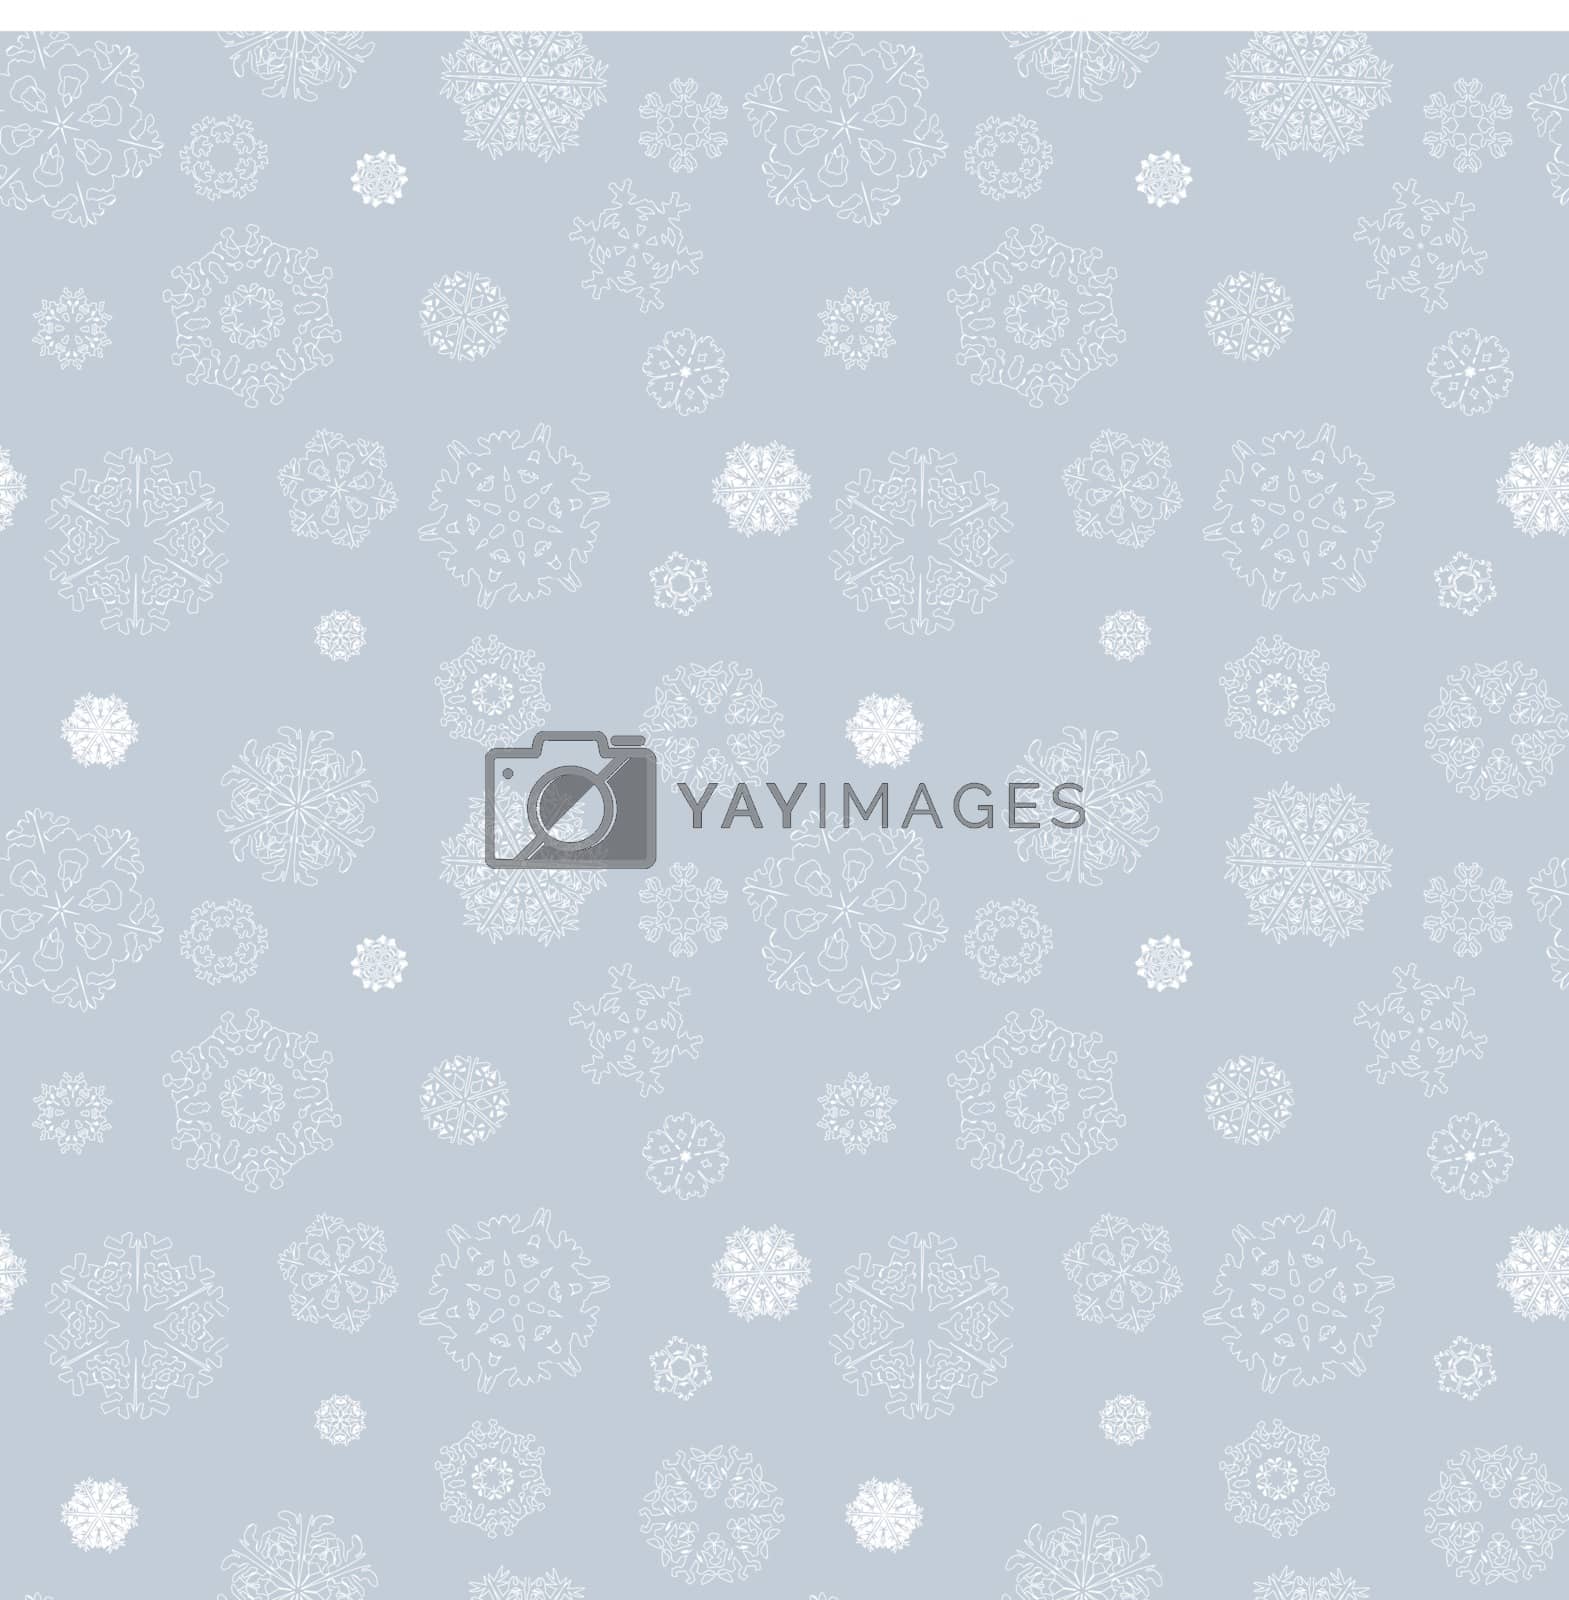 Royalty free image of Snowflakes Winter seamless texture, endless pattern by LittleCuckoo